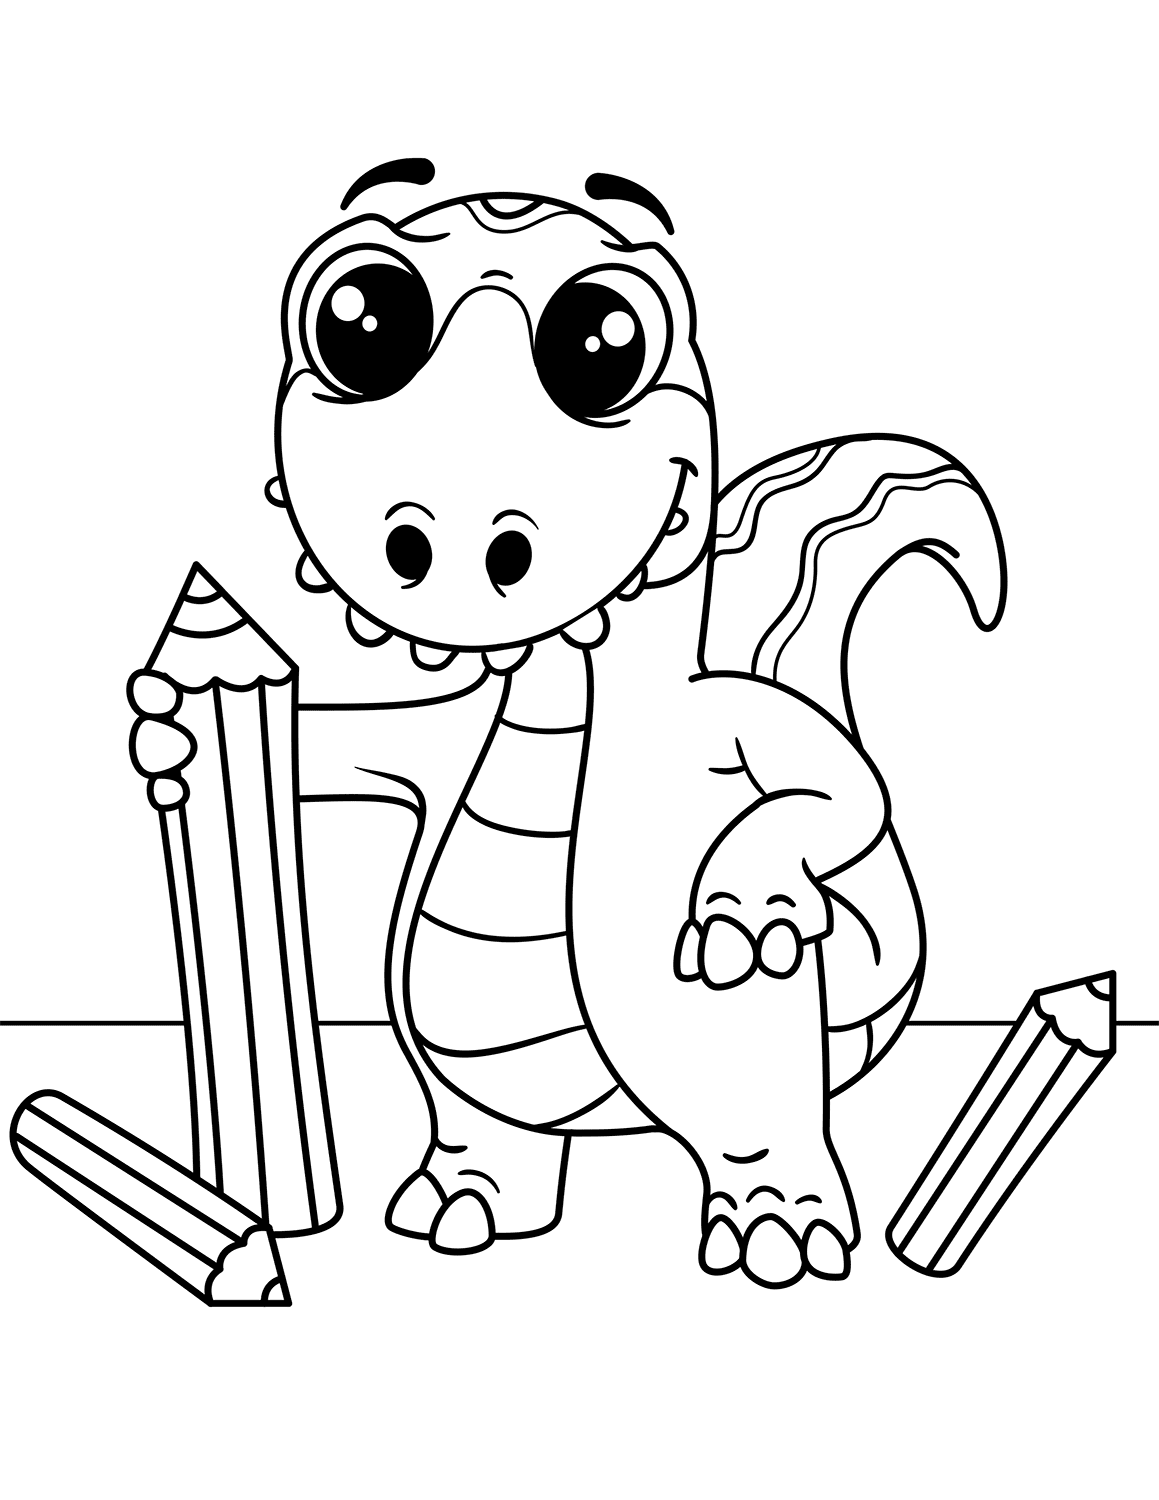 Baby Dinosaur With Pencils Coloring Page - Free Printable Coloring Pages  for Kids